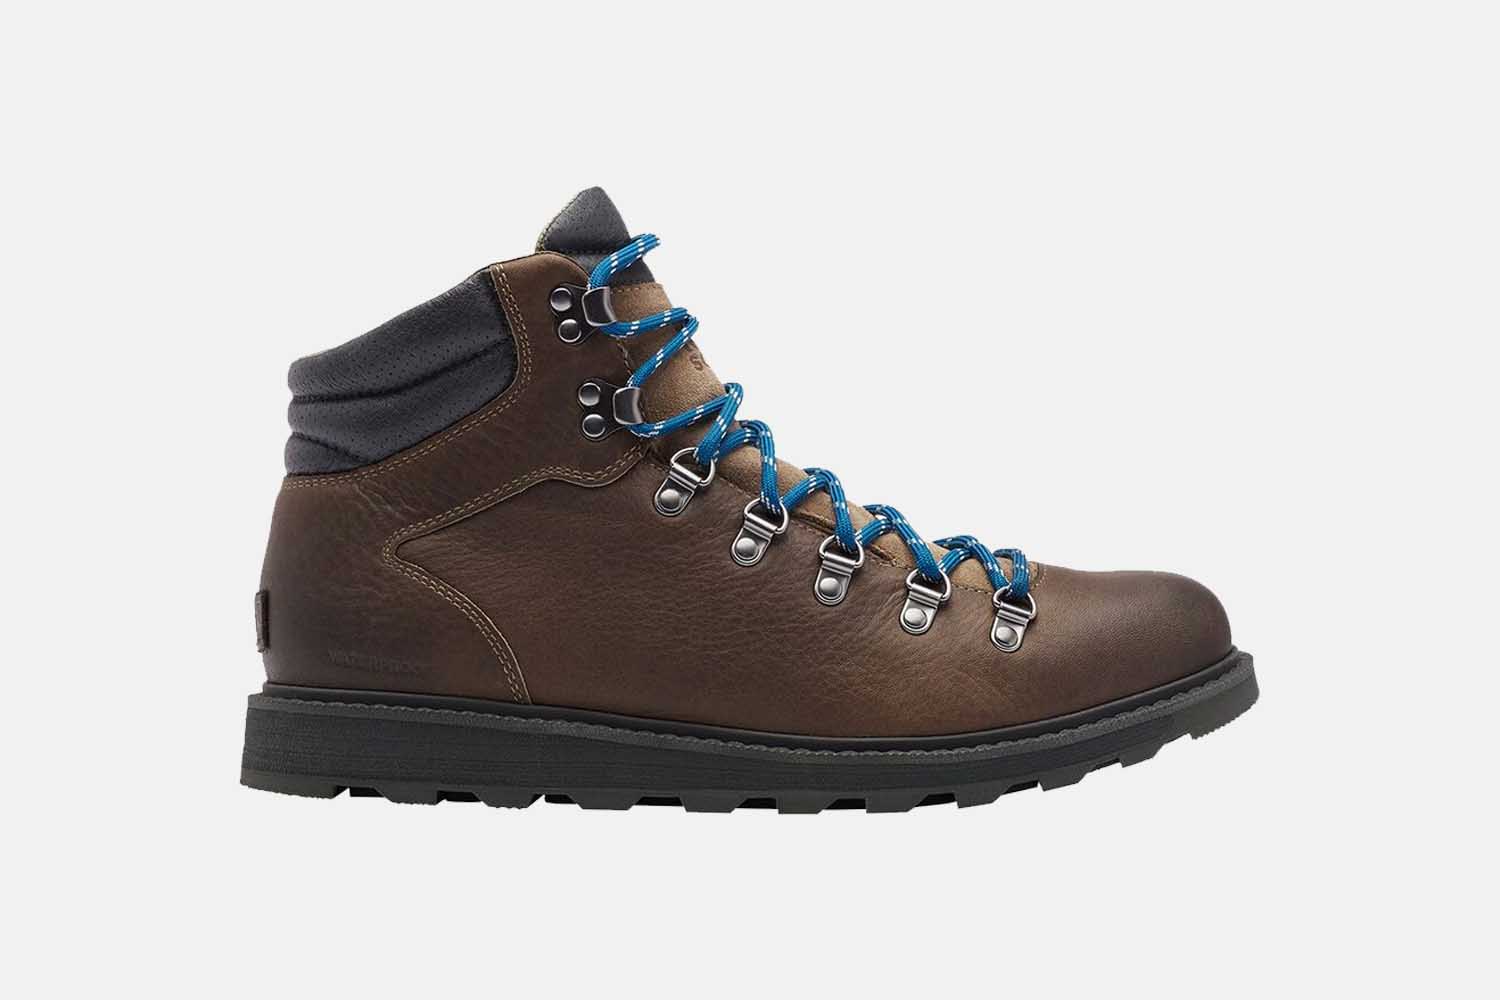 Deal: Snag a Reliable Pair of Hiking Boots and Save 25%